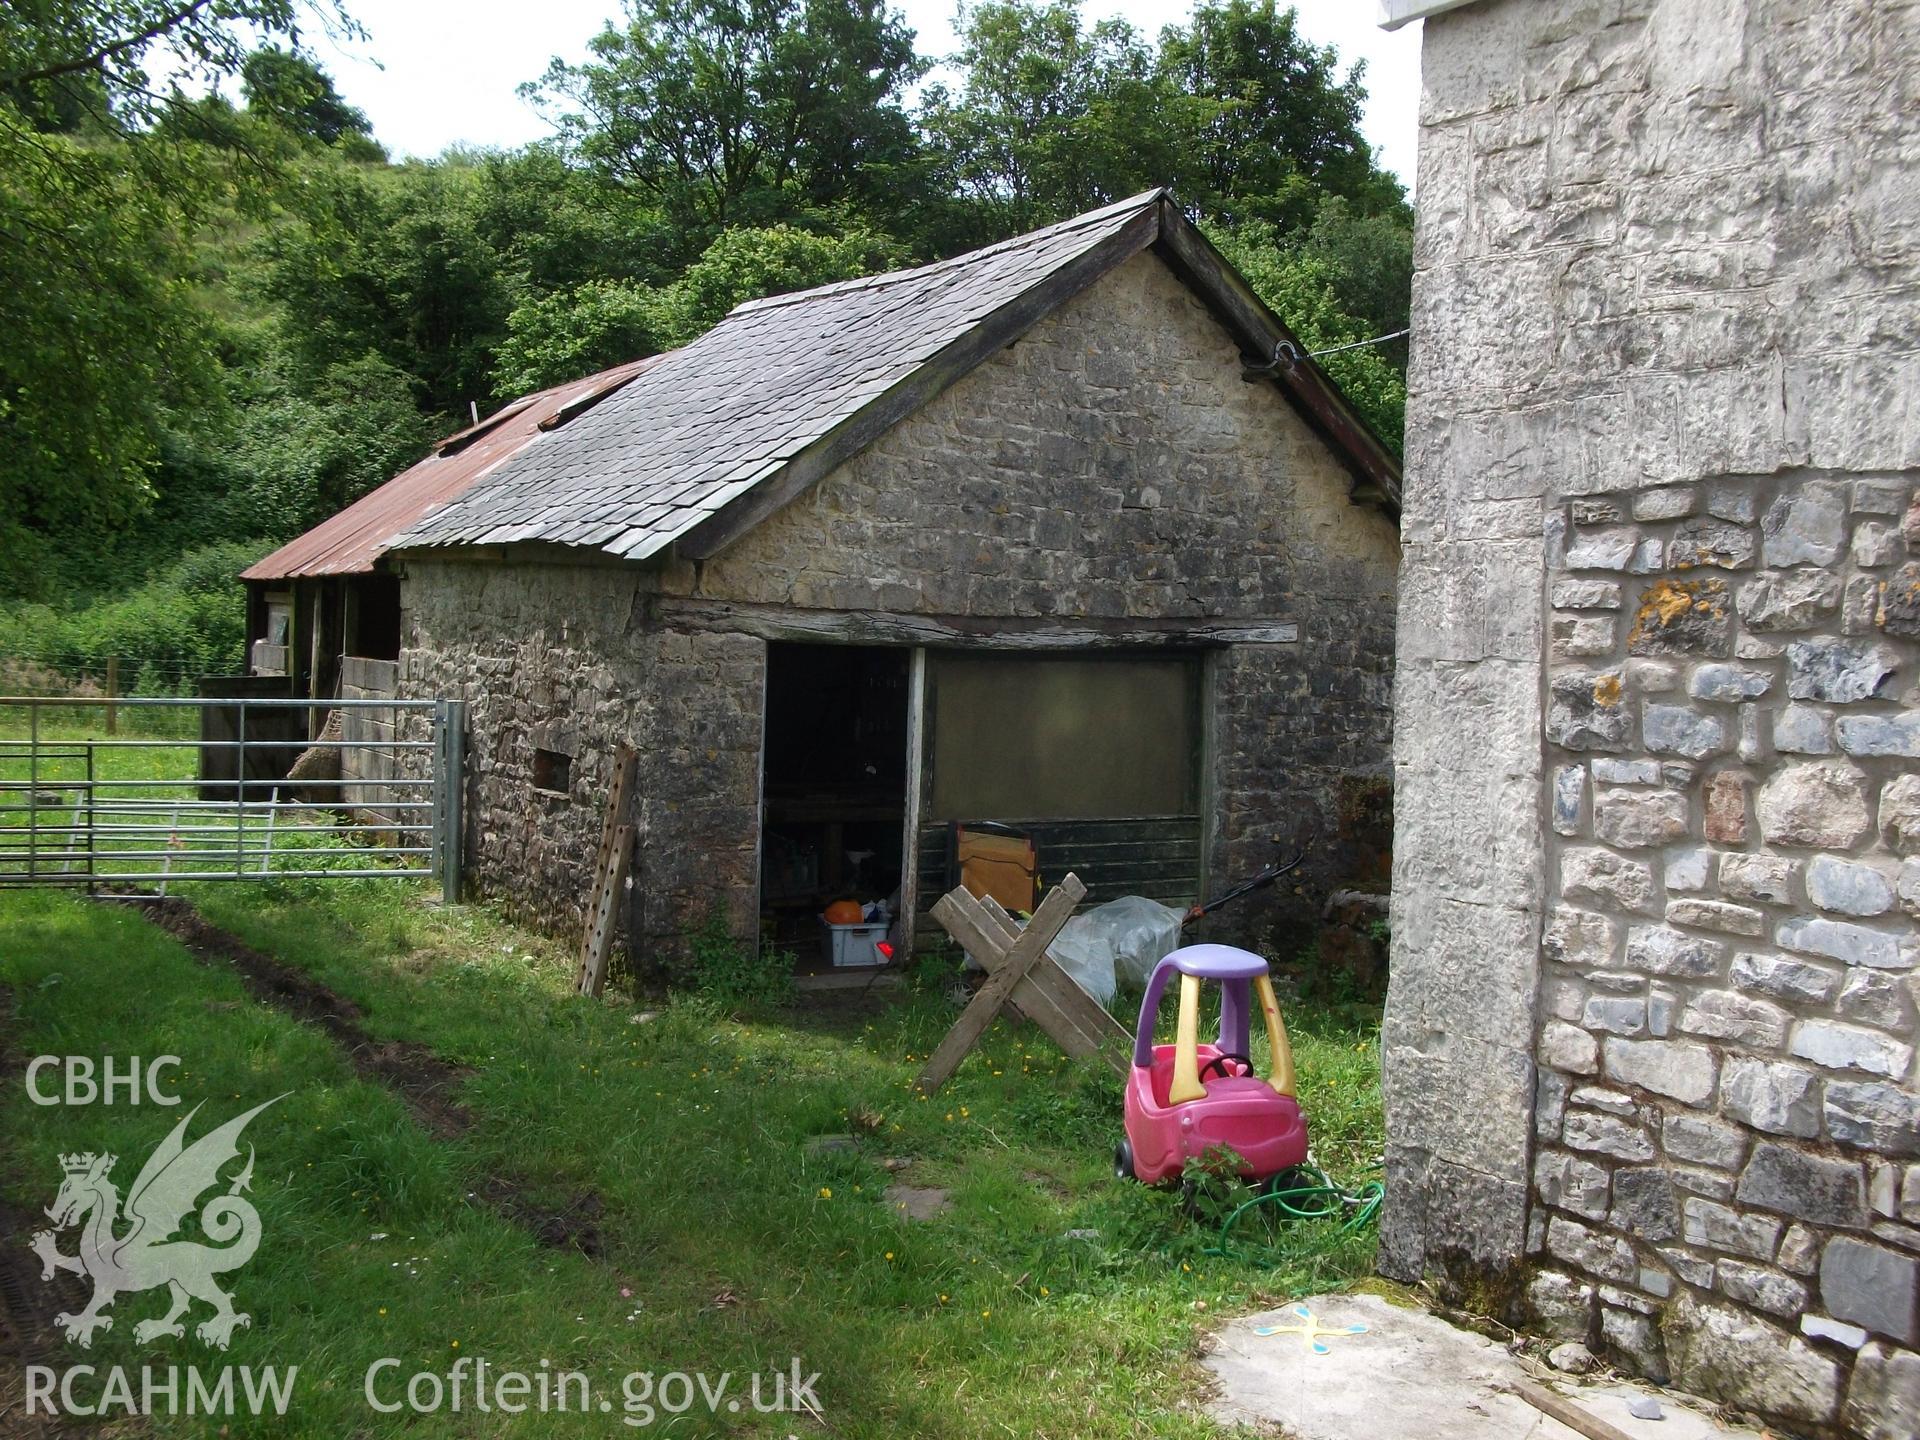 Photograph showing rear of building attached to the cottage and rear and side elevation of building adjacent to the cottage at Pant-y-Castell, Maesybont. Photographed by Mark Waghorn to meet a condition attached to planning application.